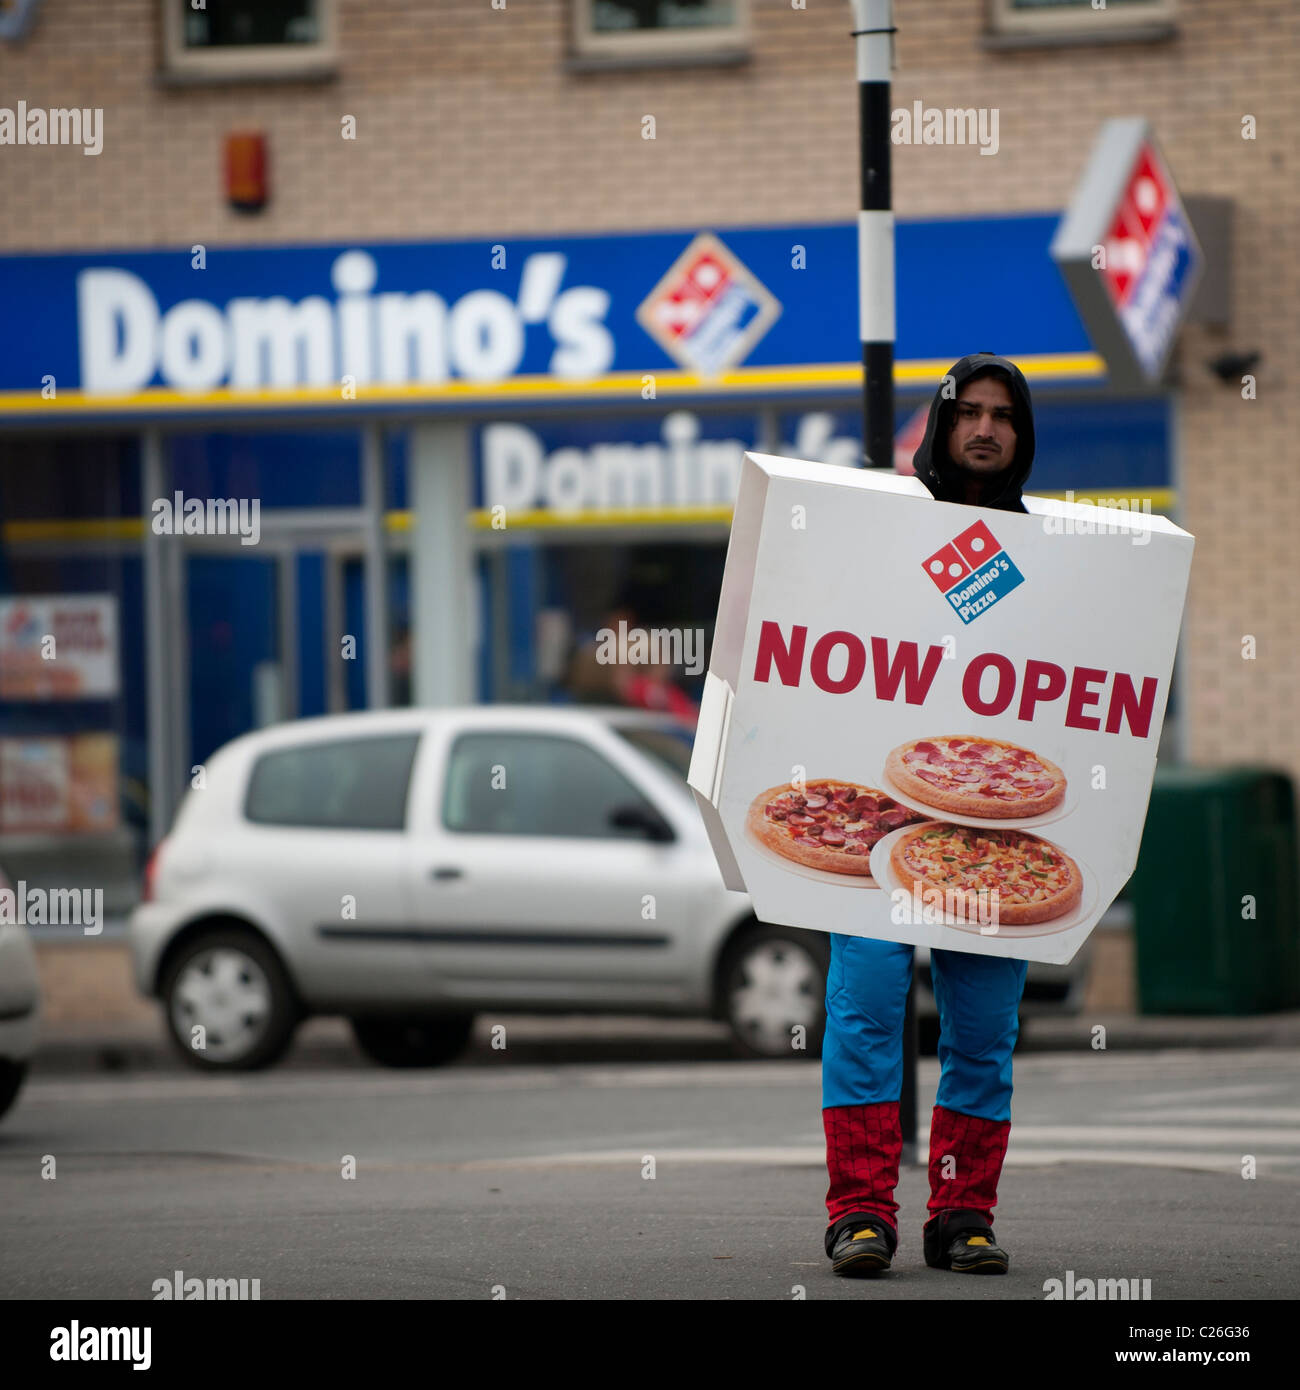 a-man-wearing-a-sandwich-board-promoting-a-new-dominos-pizza-franchise-C26G36.jpg